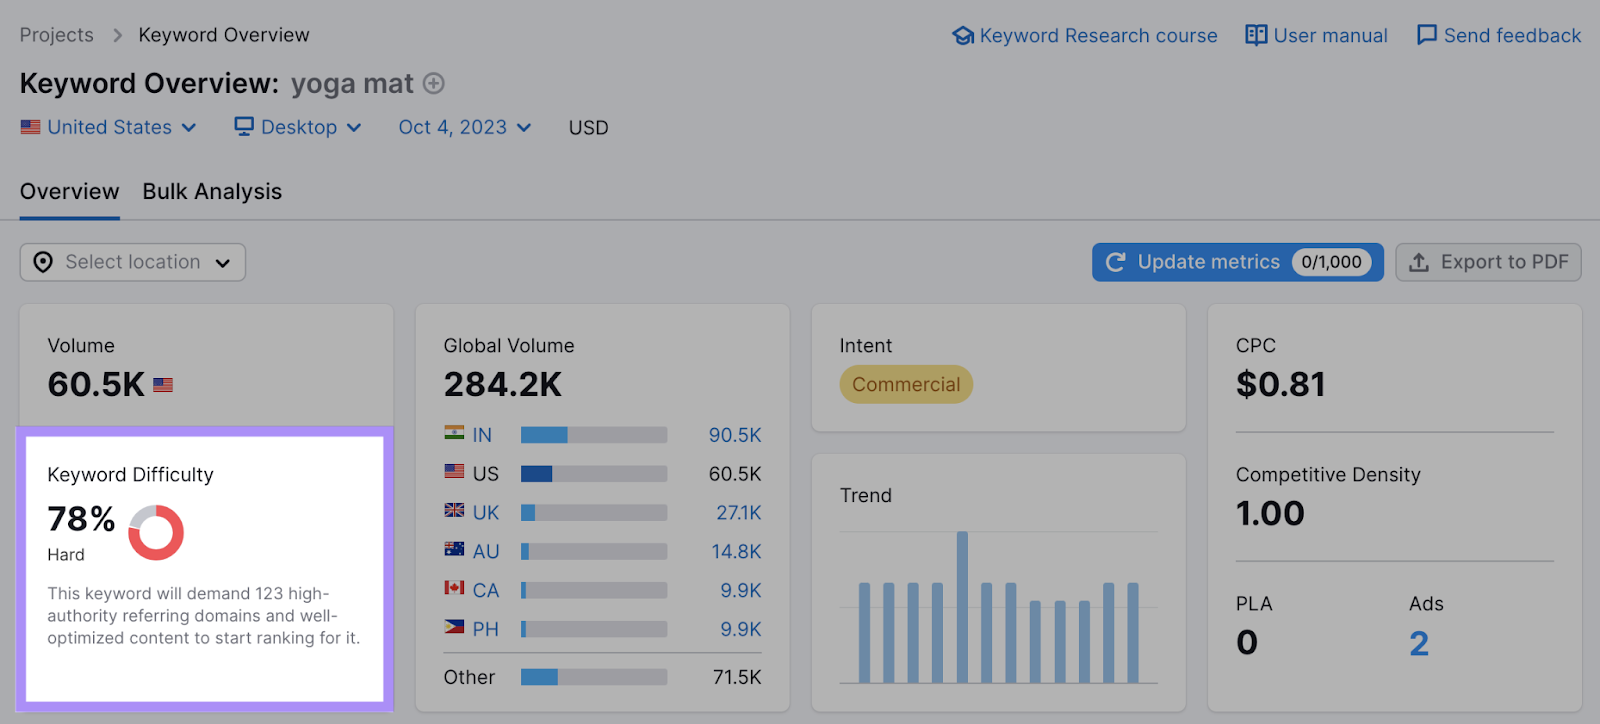 "yoga mat" keyword shows a KD of 78% in the Keyword Overview tool